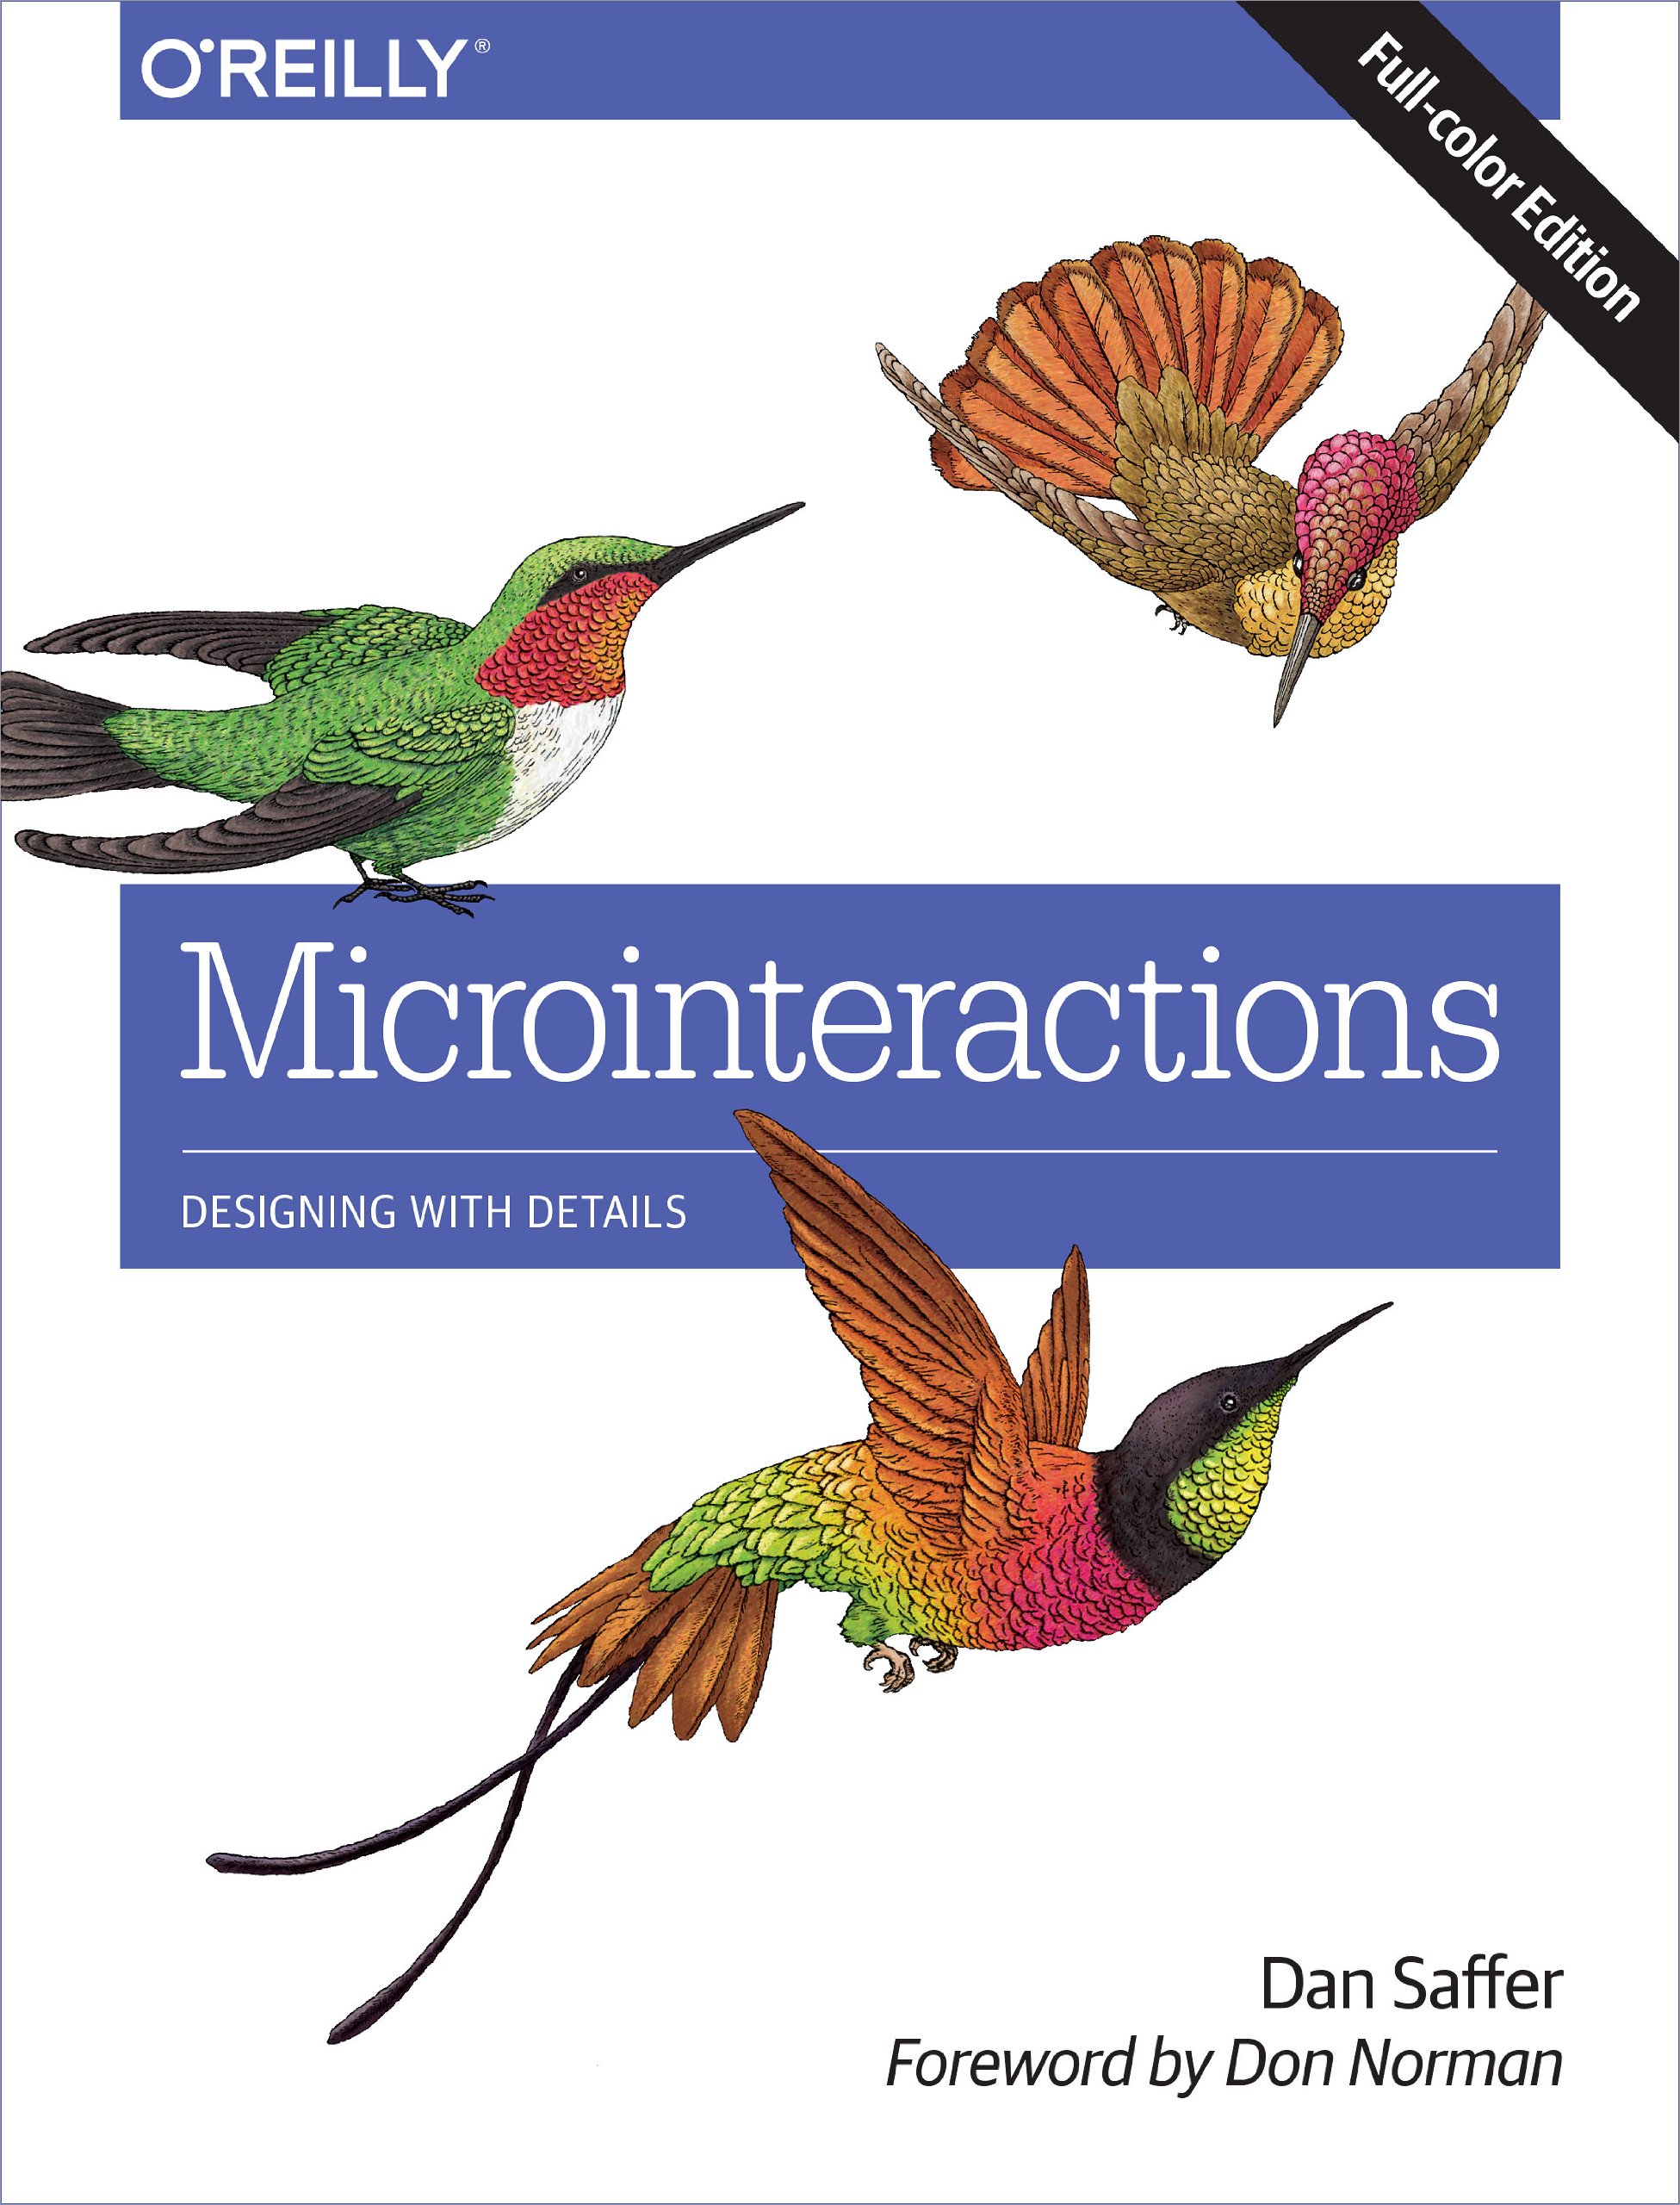 Microinteractions by Dan Saffer